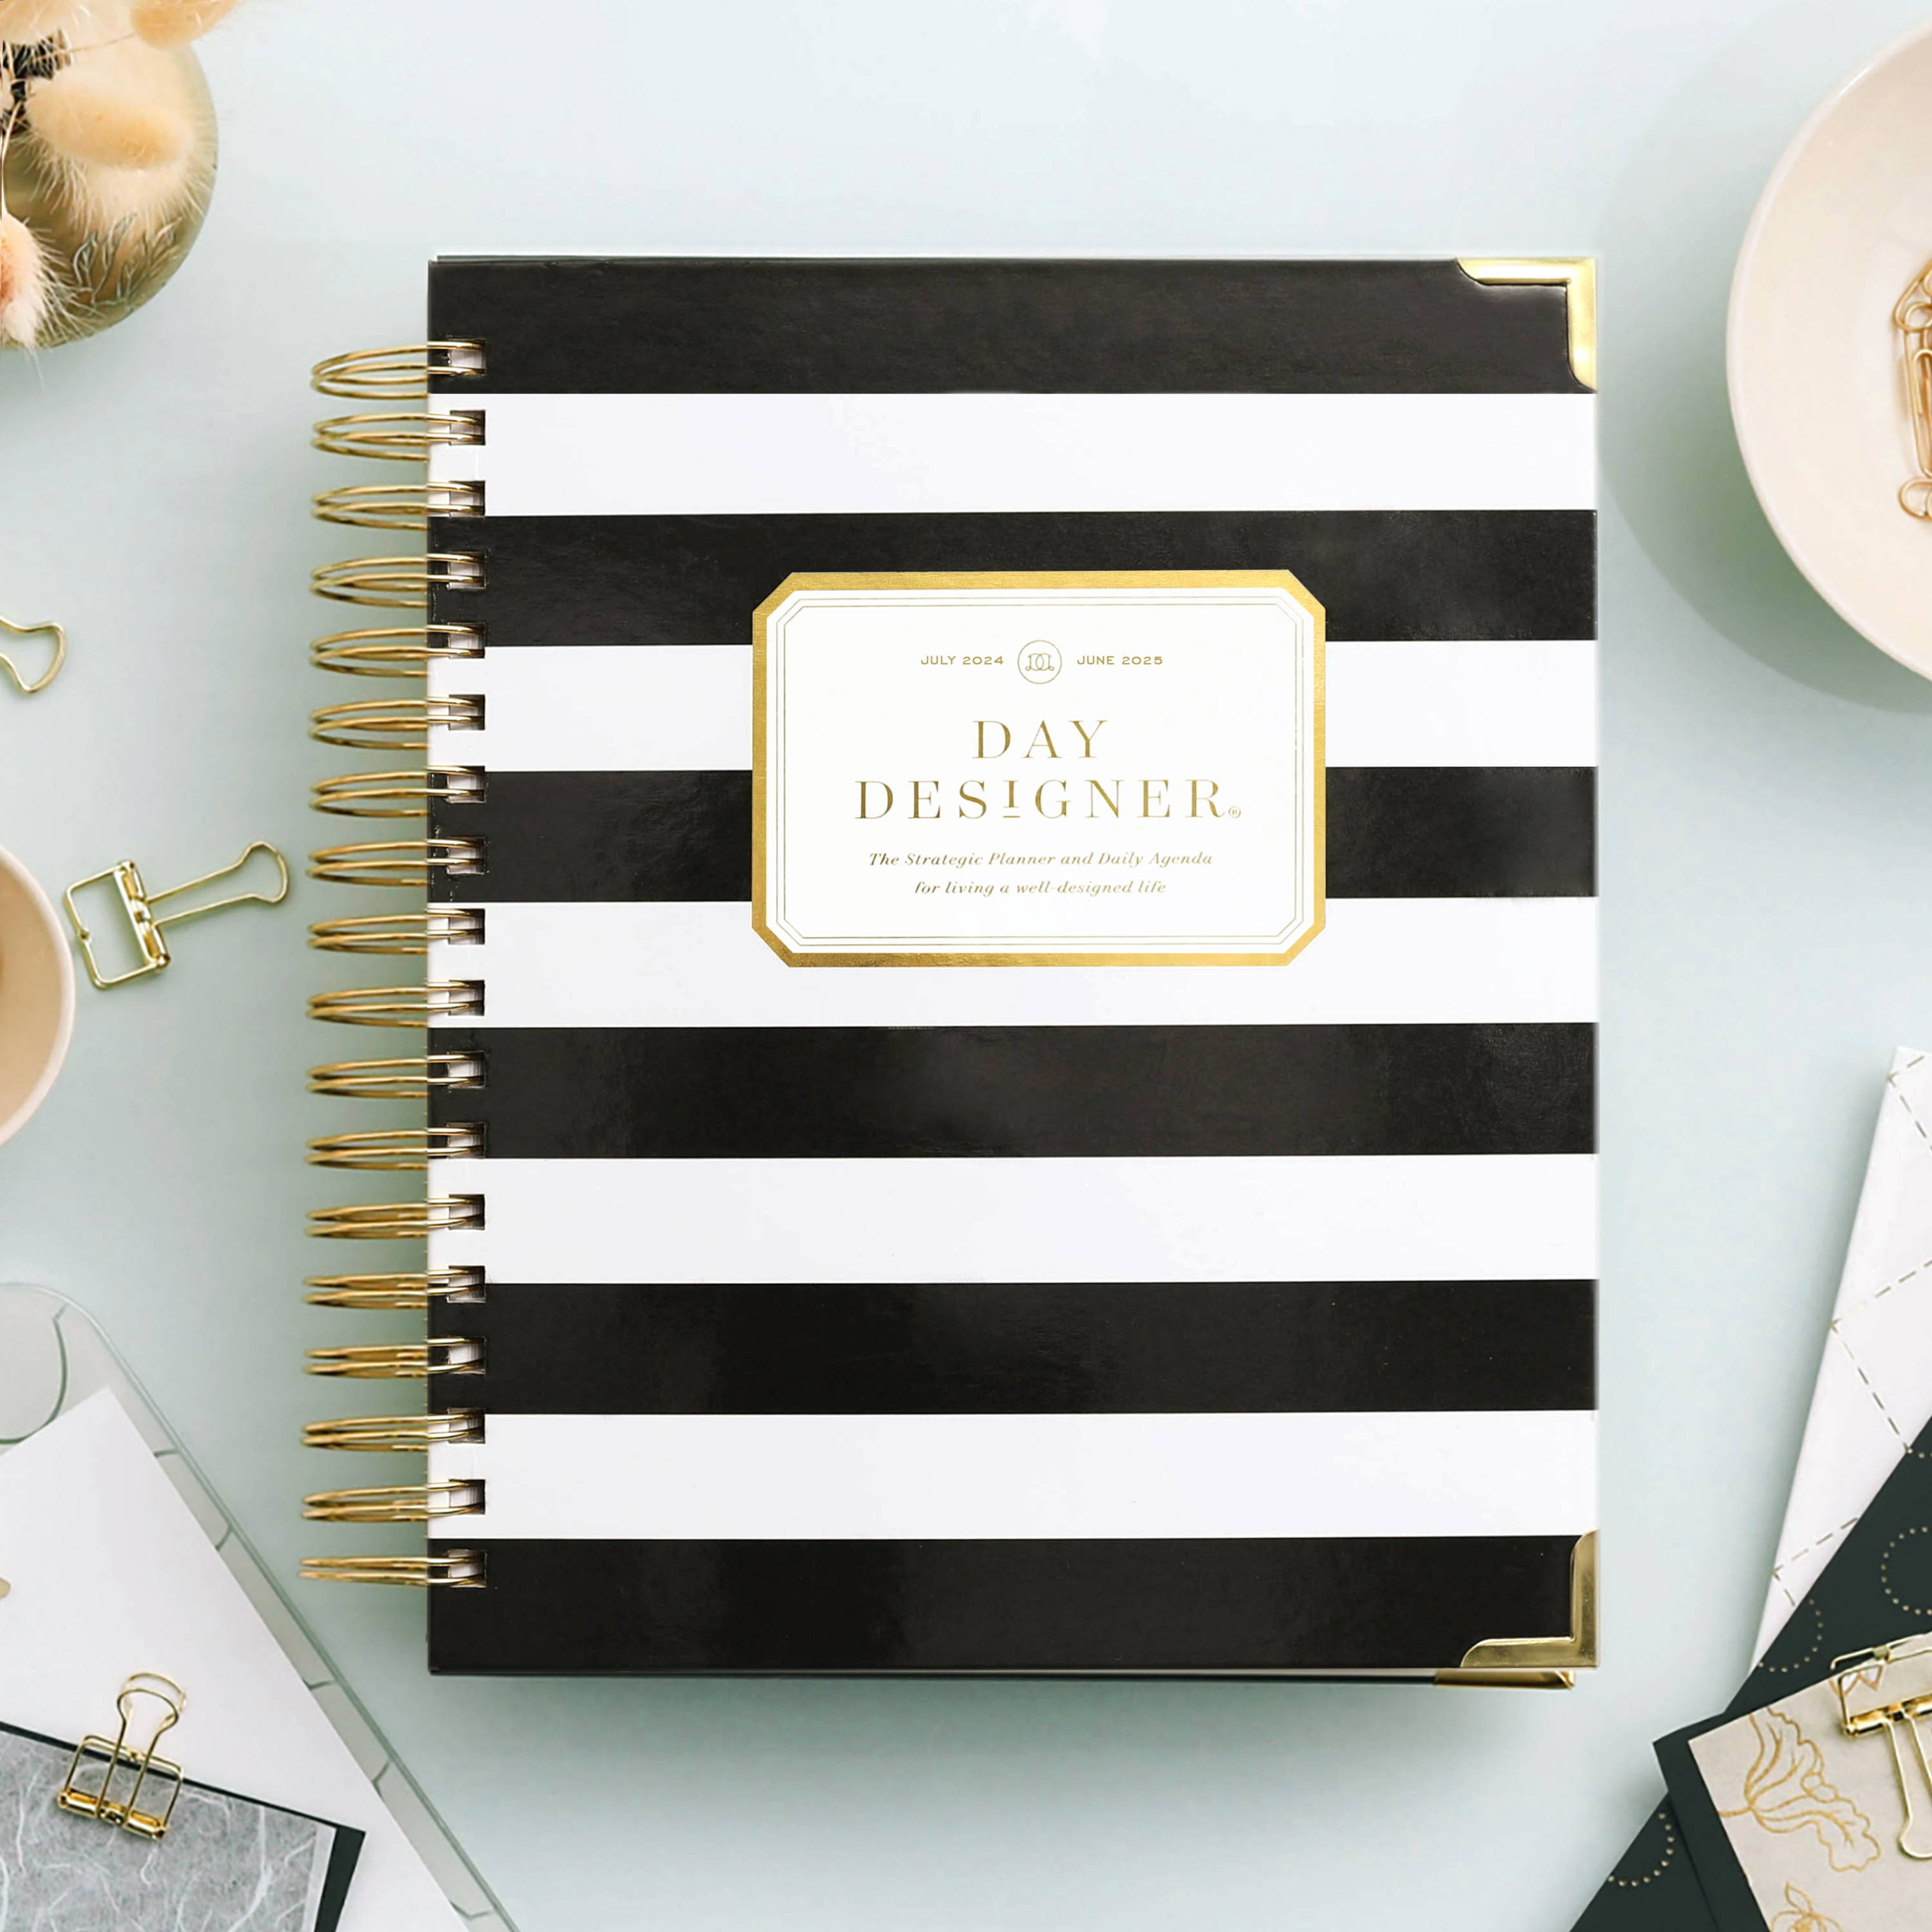 black and white stripe closed book planner on mint green background, paper clips, paper, dish and dried flowers